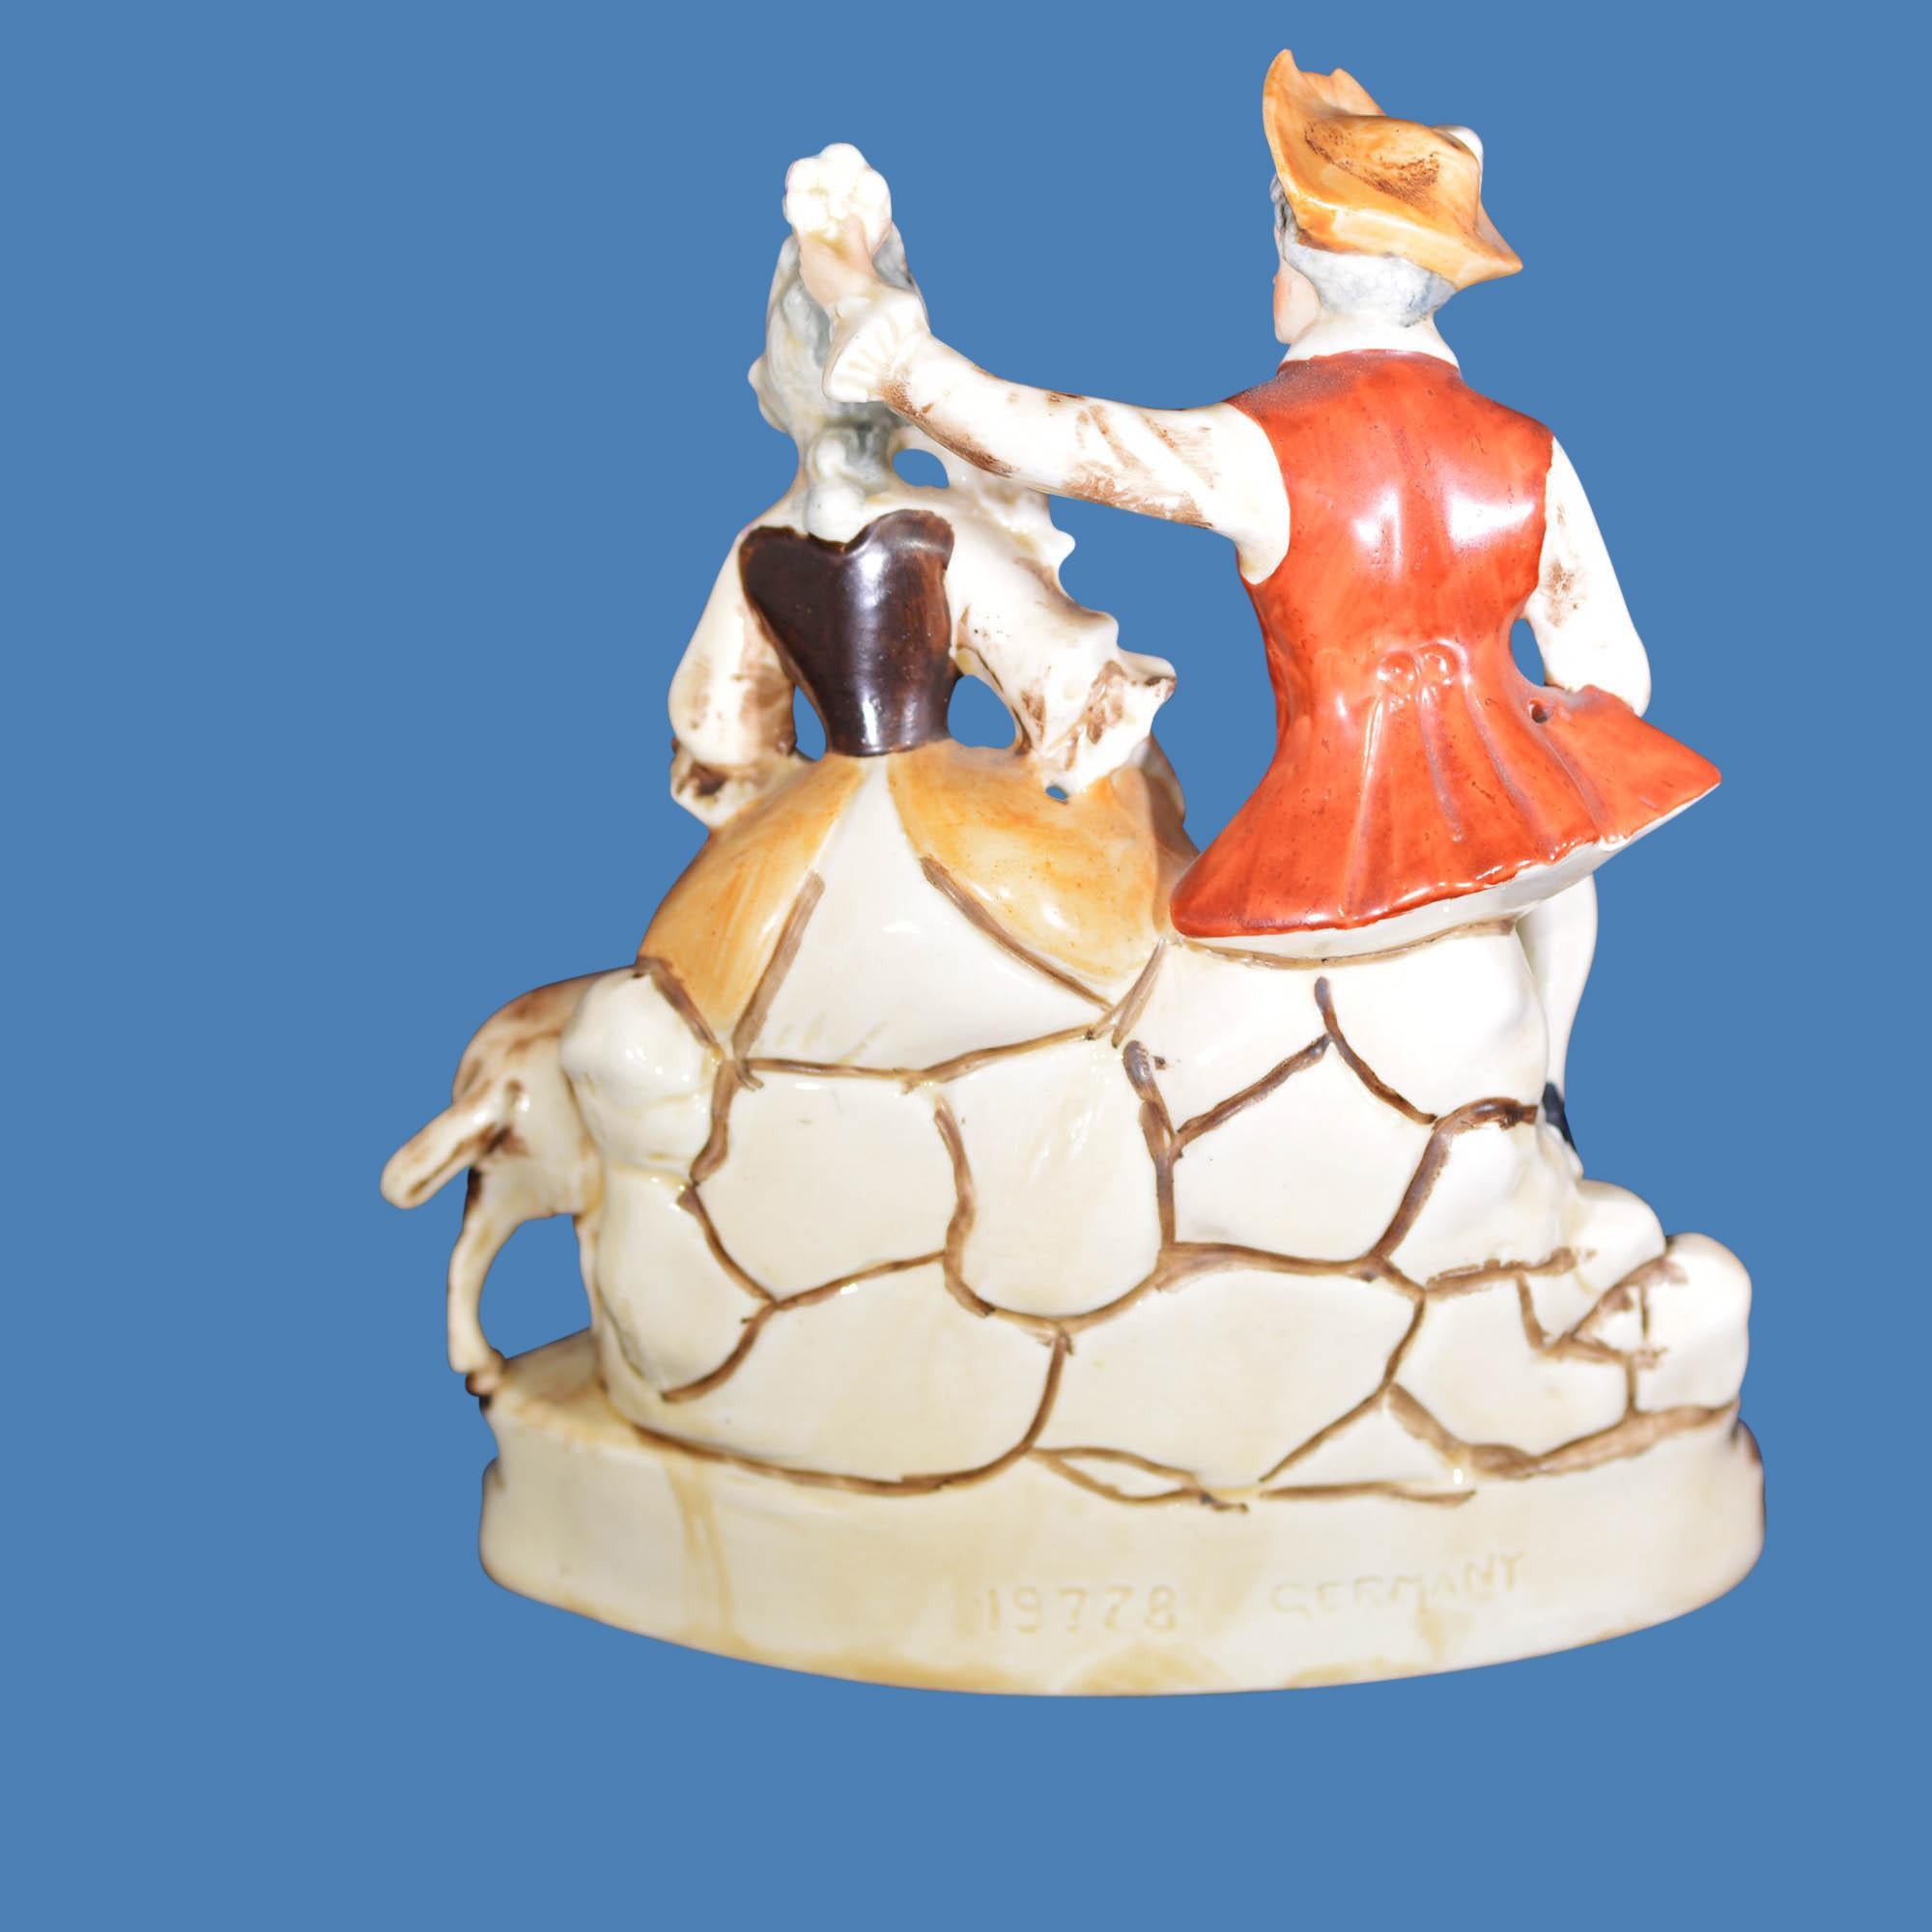 20th Century Hand Painted German Figurine Couple in Historic Dress